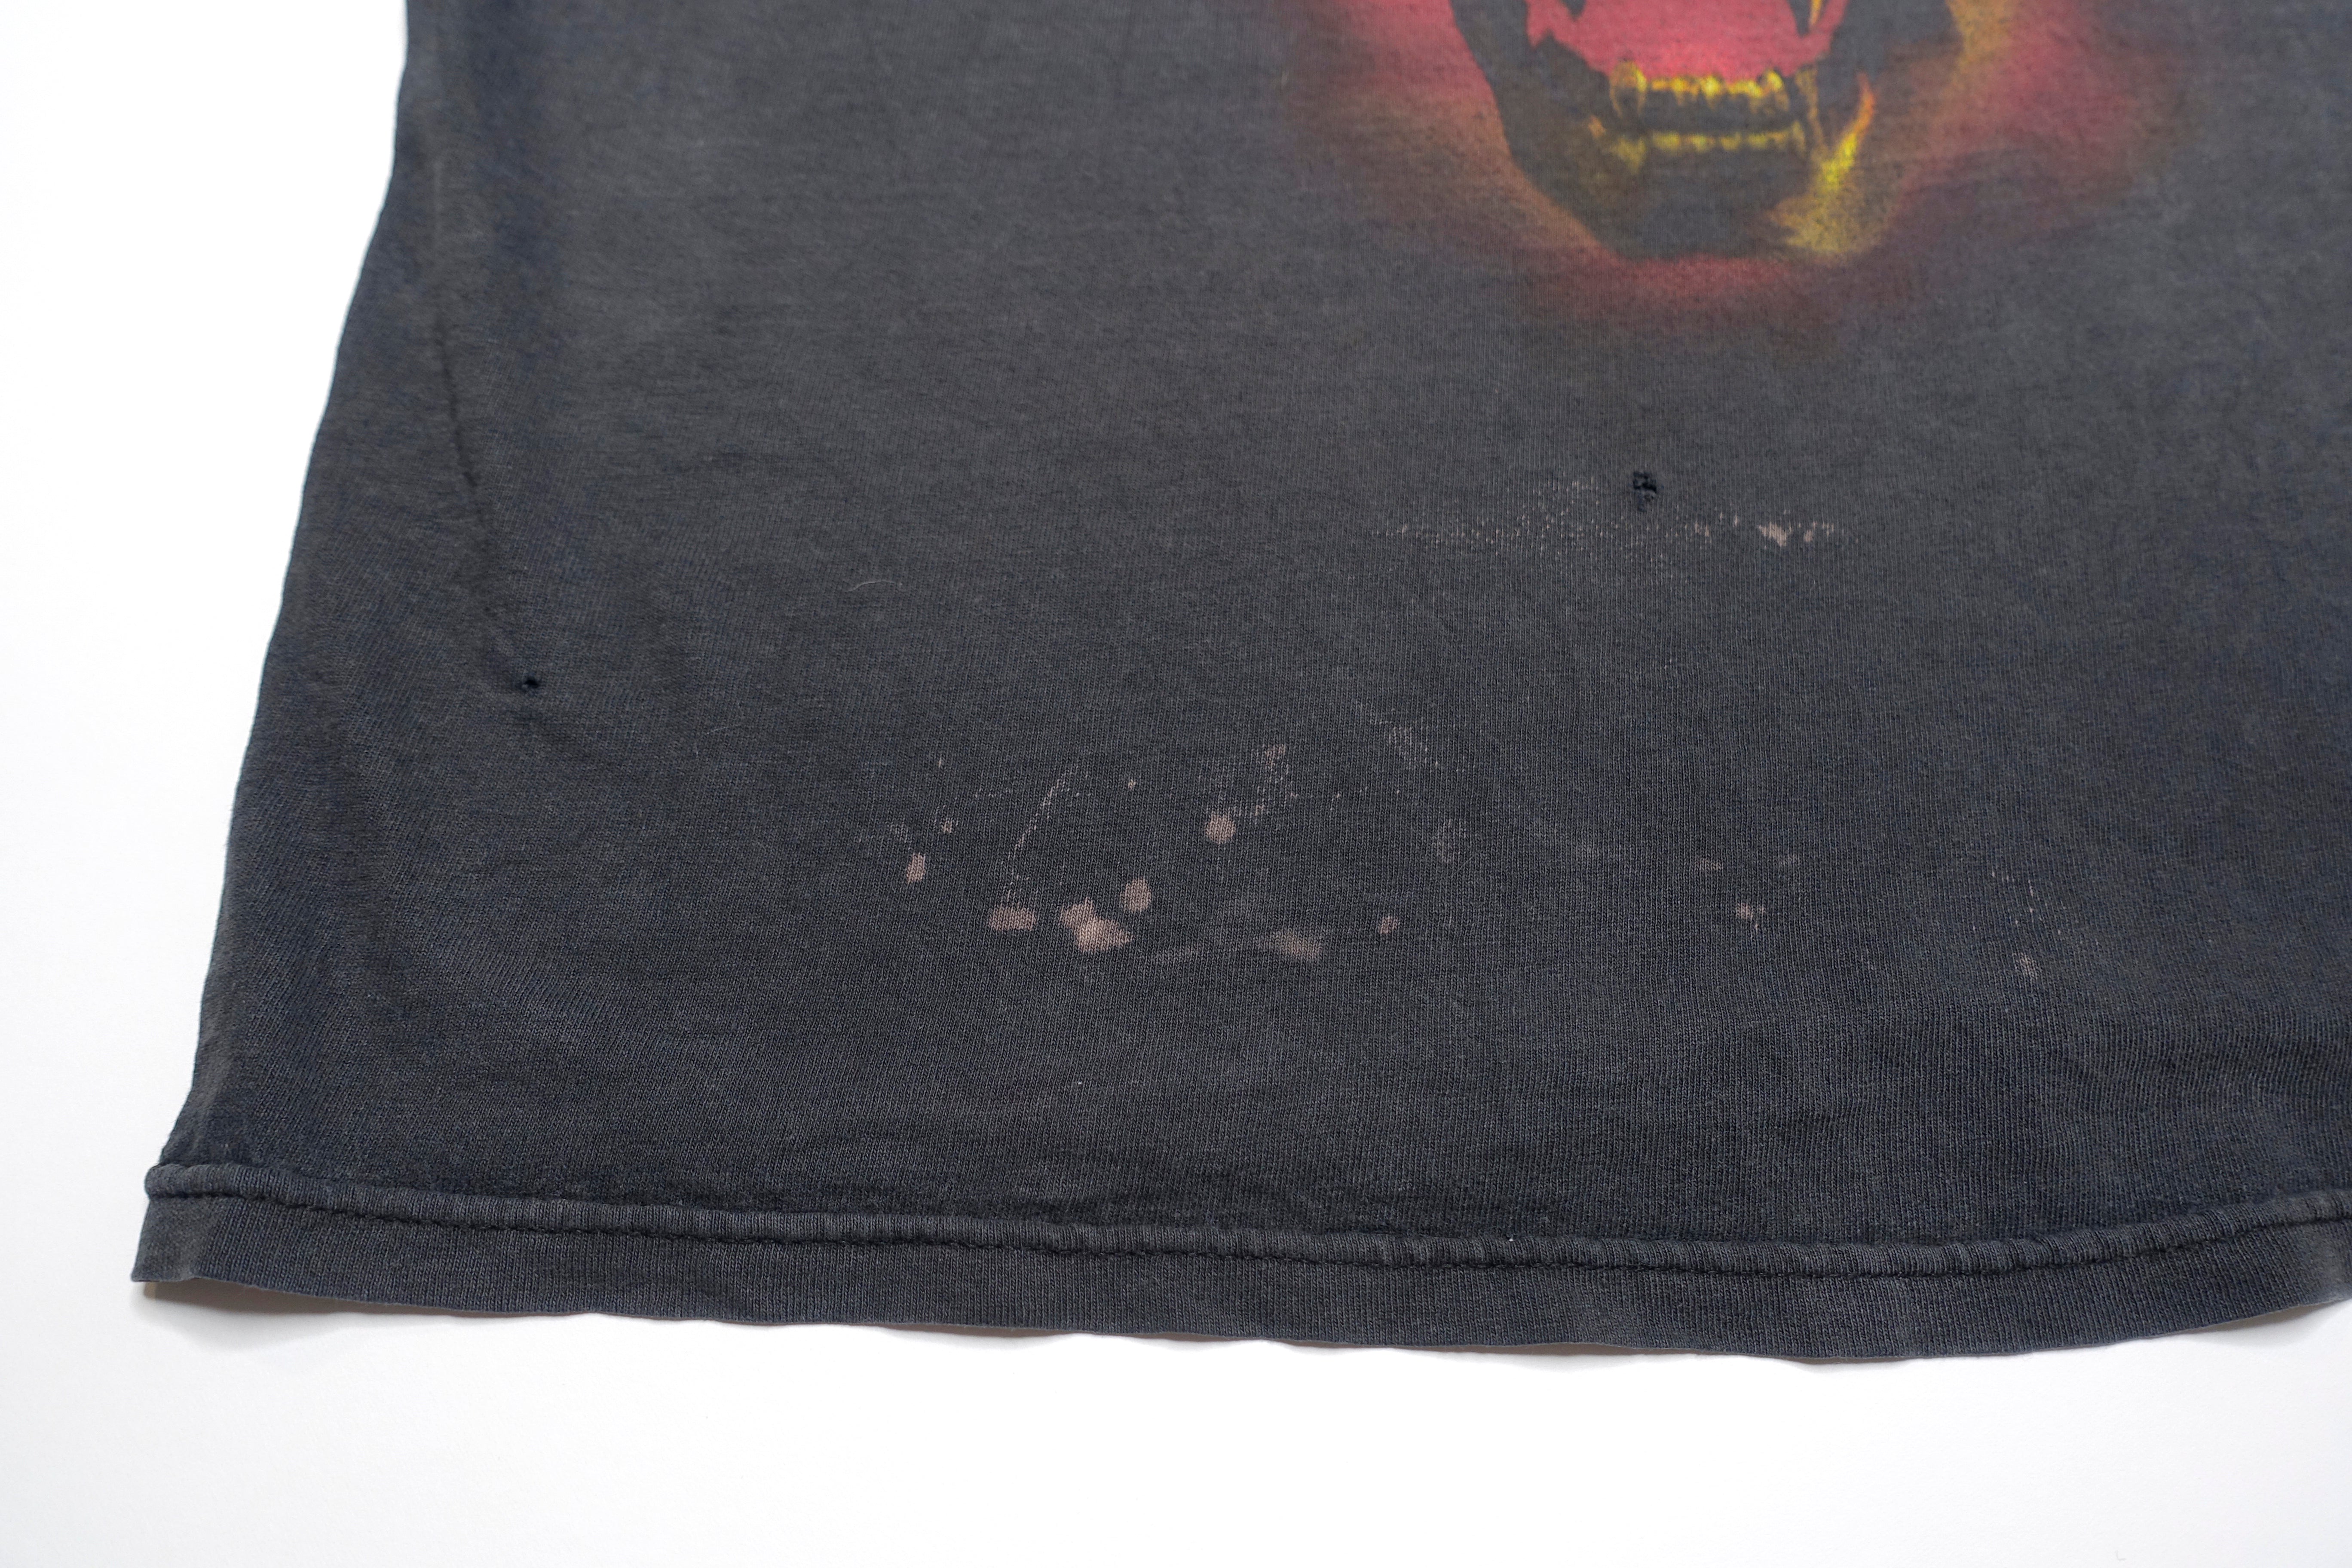 Pantera - Cowboys From Hell 2000 Tour Issue Shirt Size Large